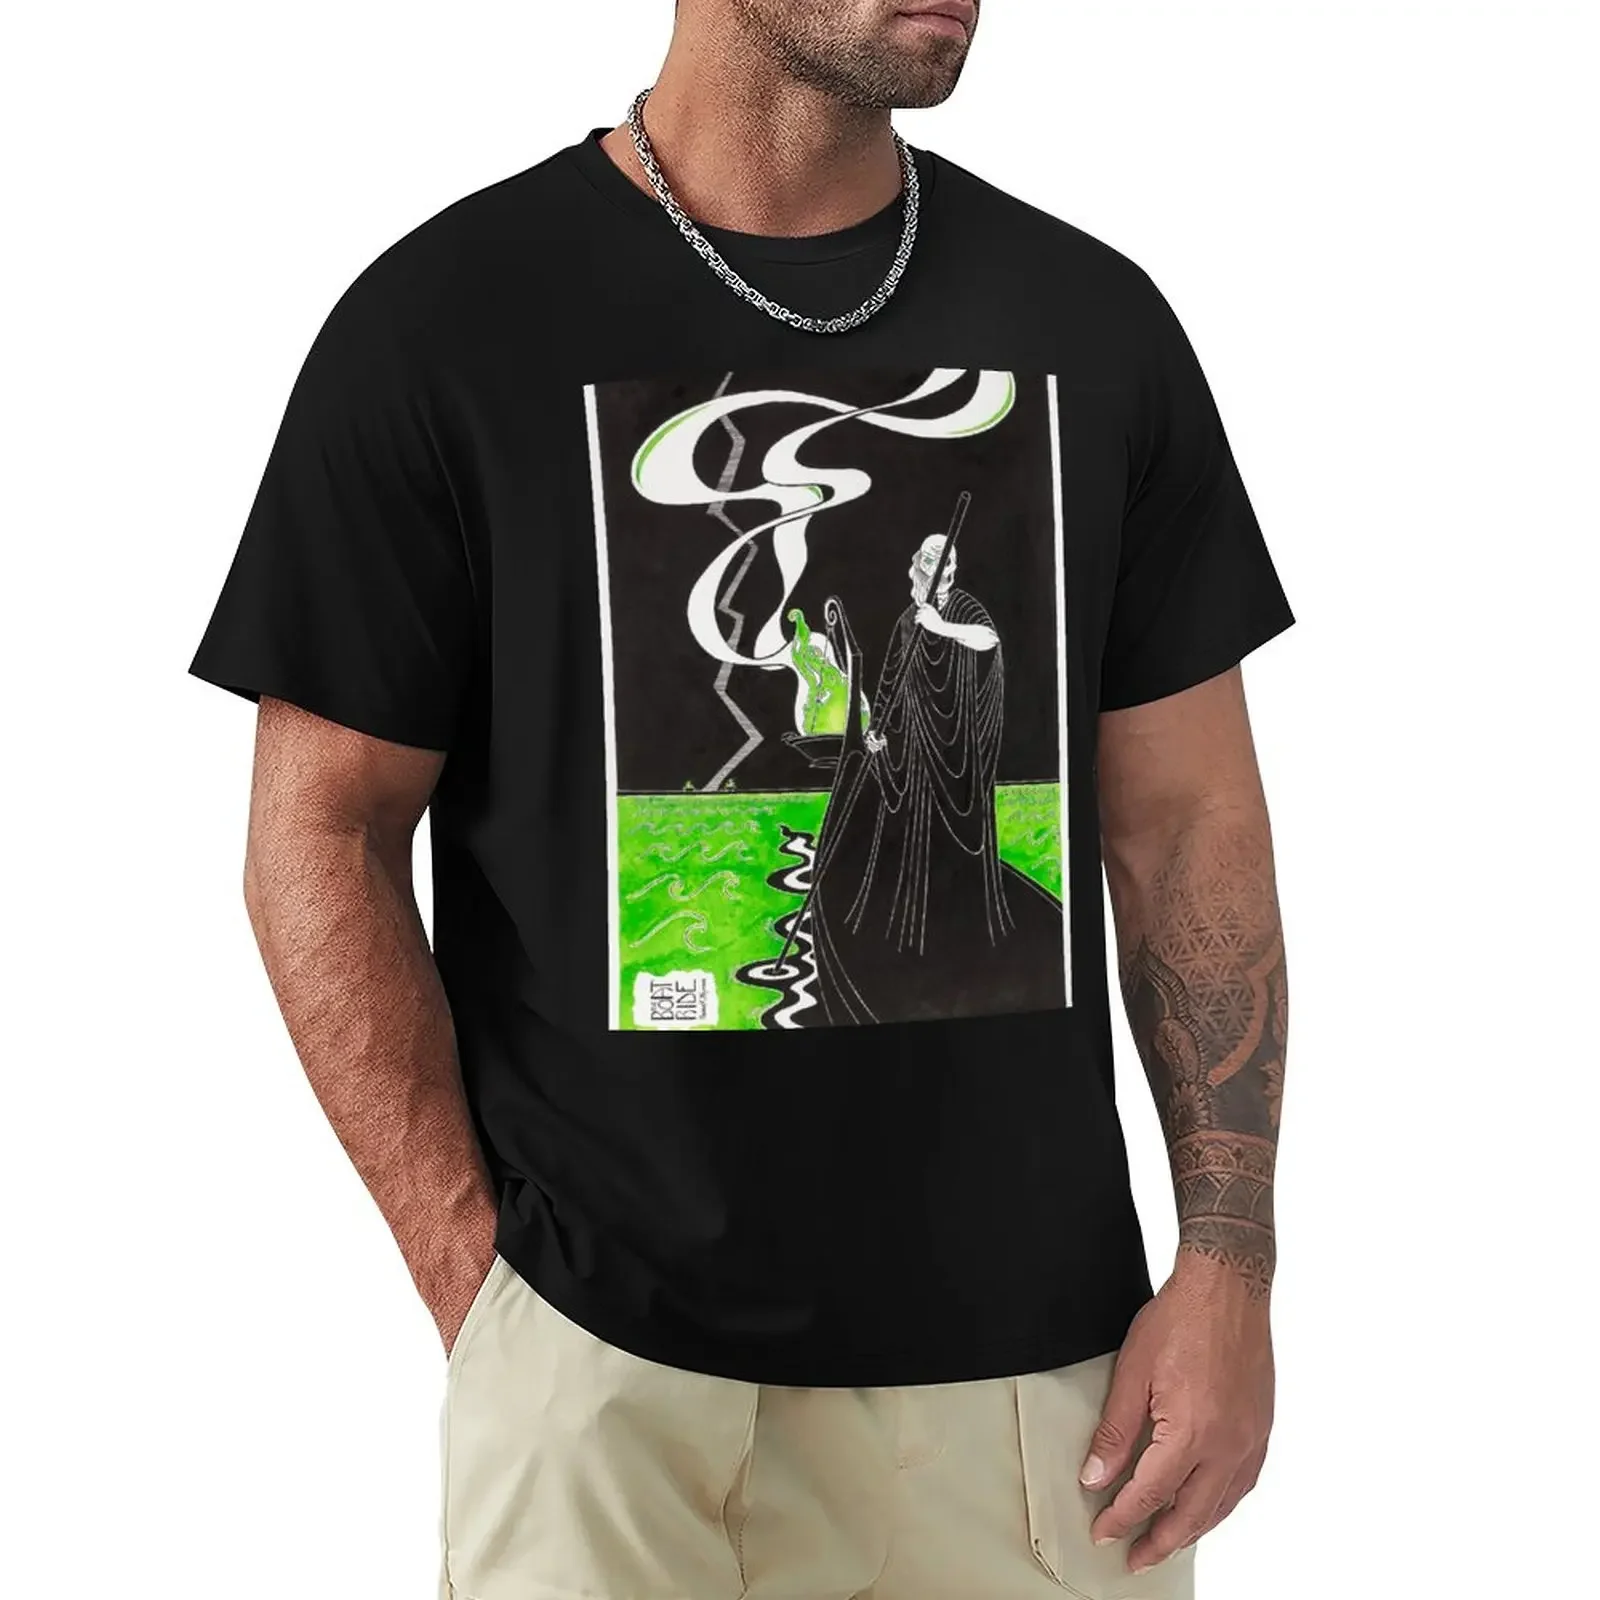 

The Boat Ride T-Shirt plus sizes for a boy customs design your own mens plain t shirts